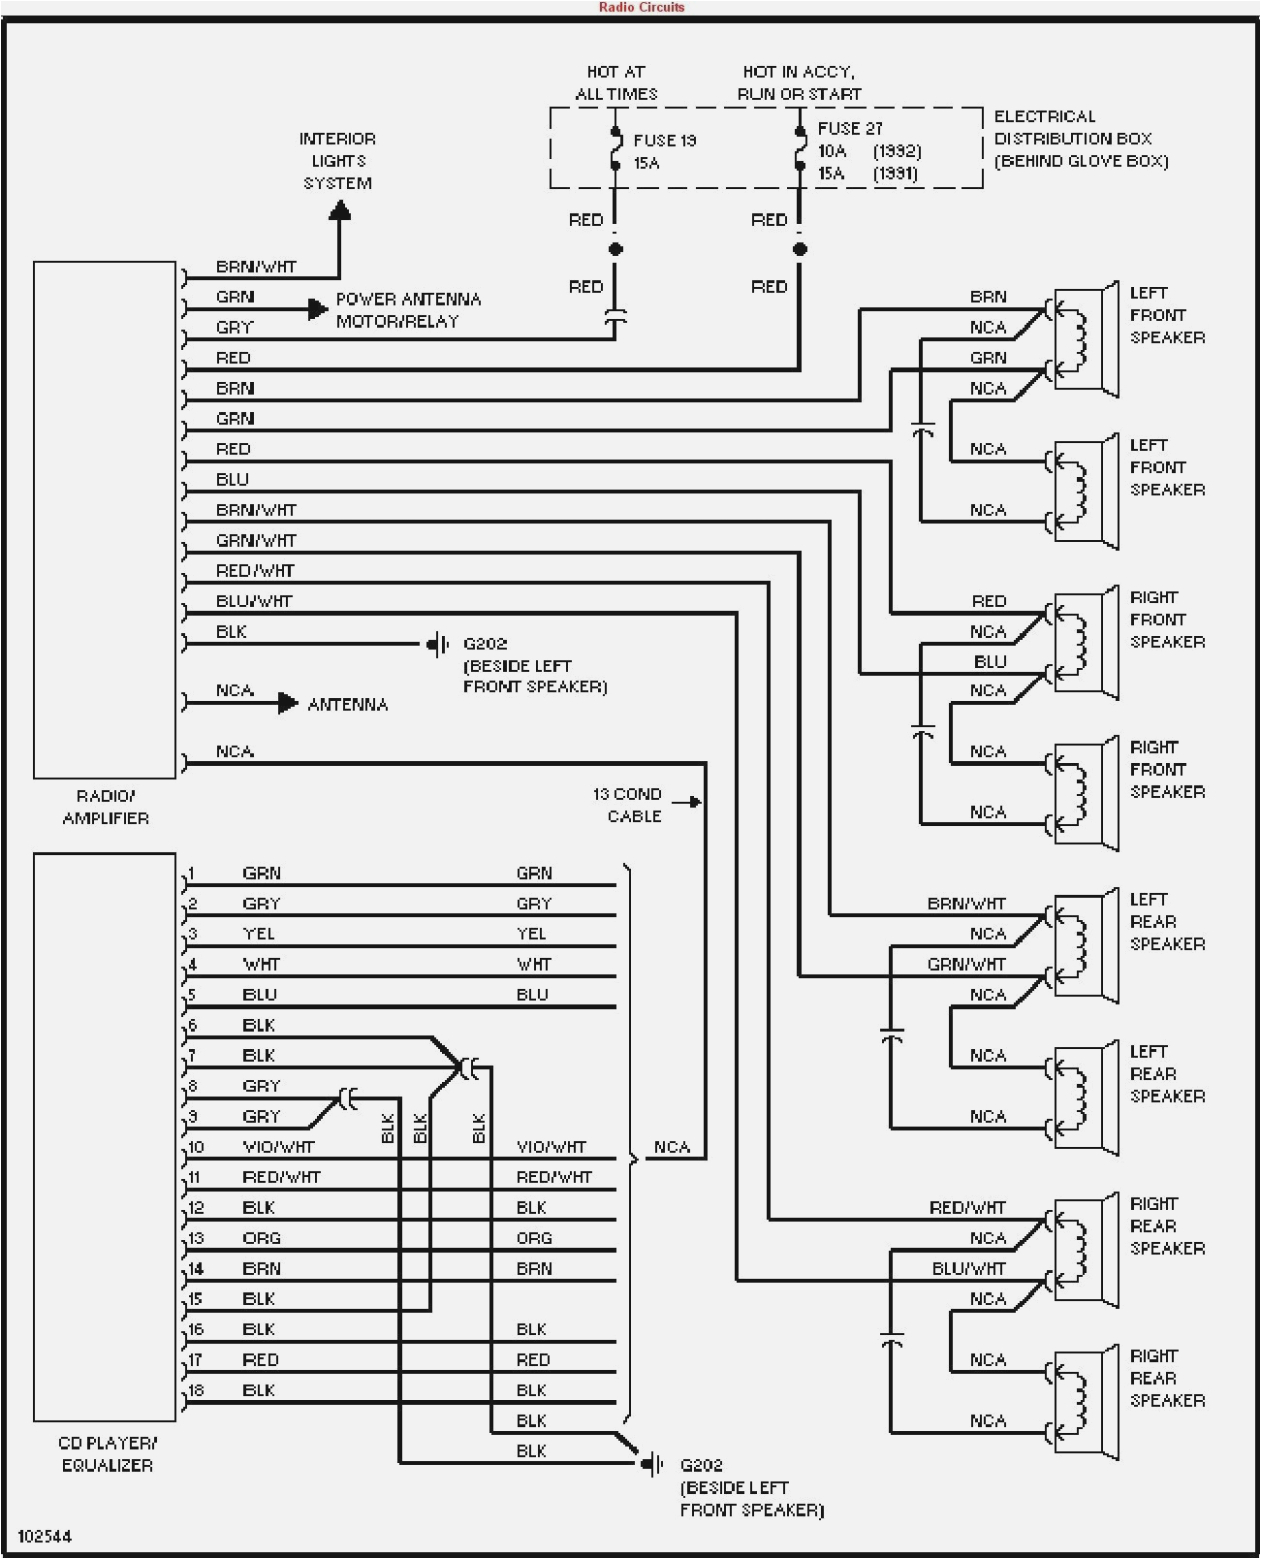 pioneer p3200dvd wiring diagram for a wiring diagrams konsult pioneer avh p3200dvd wiring diagram pioneer avh p3200dvd wiring diagram